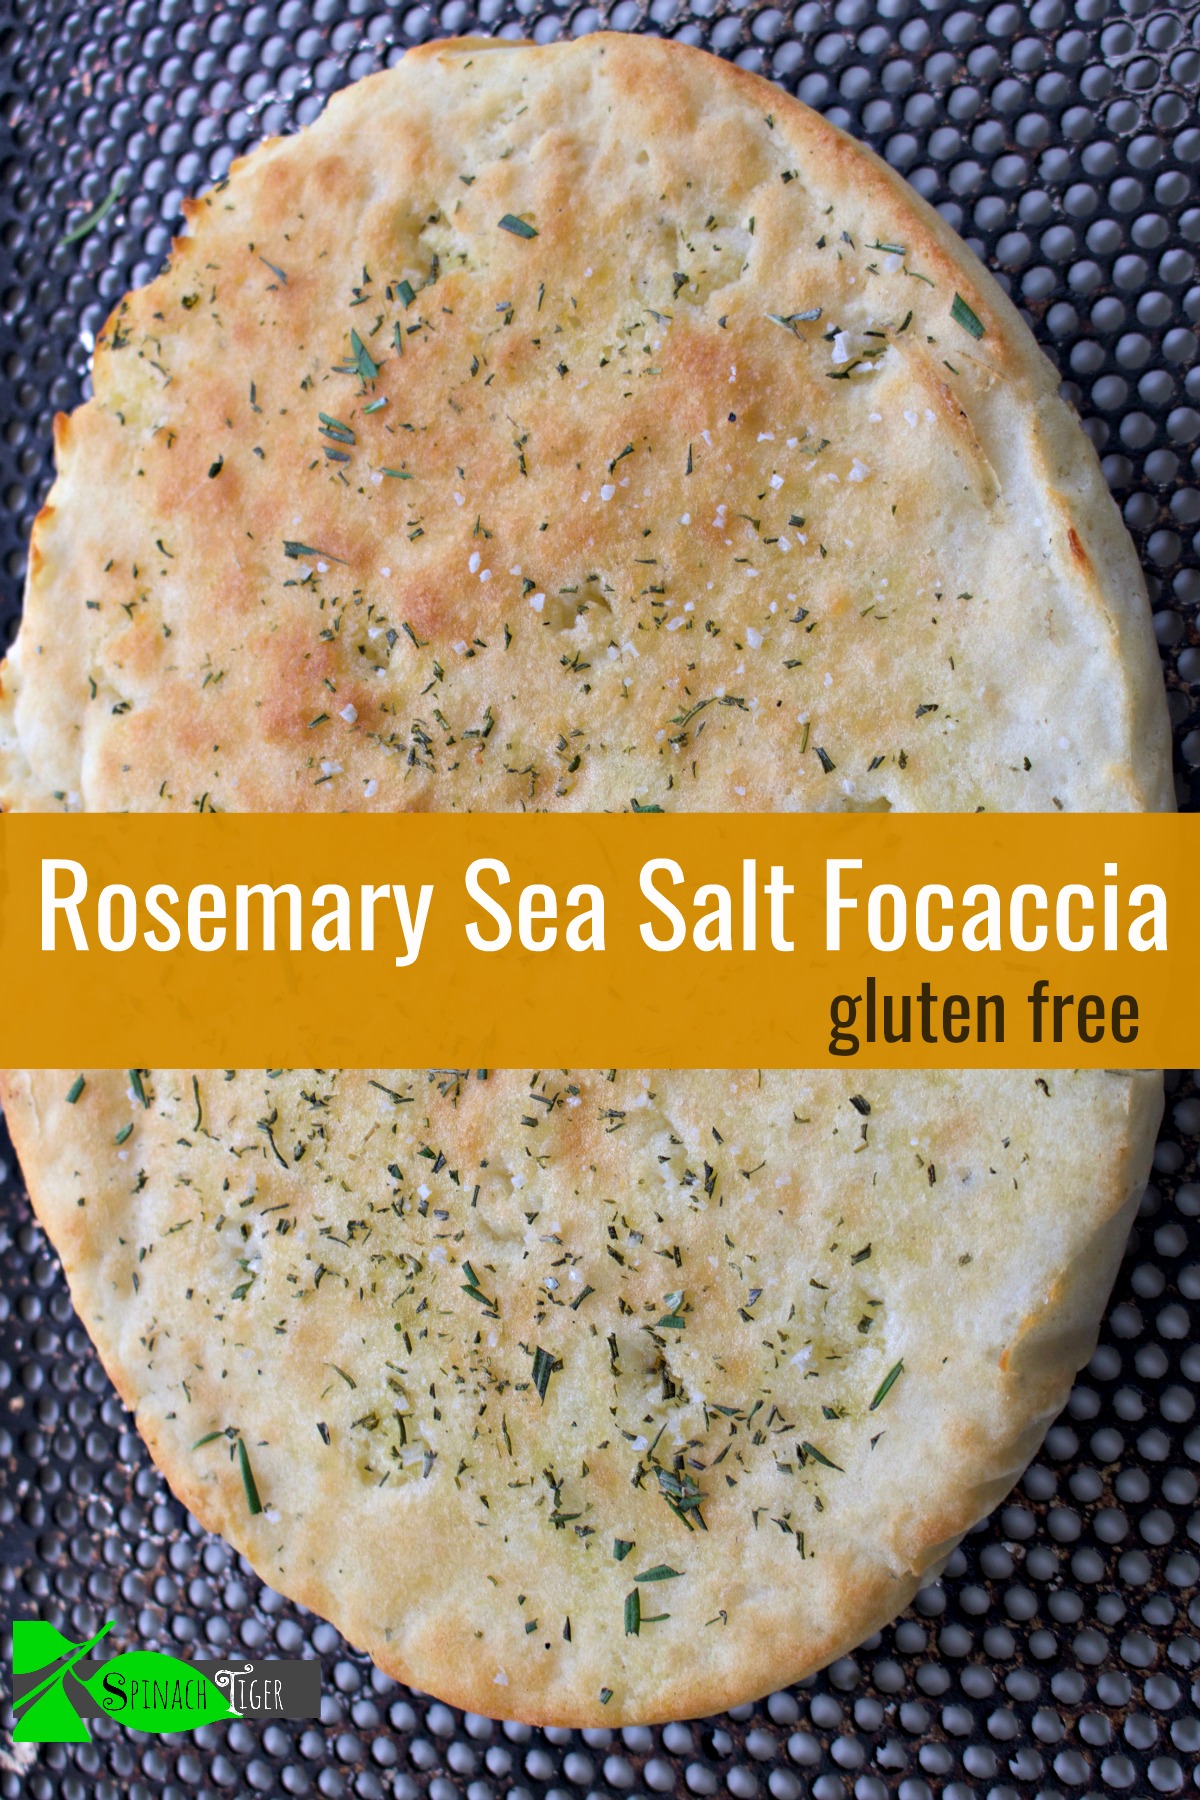 Gluten Free Focaccia with Rosemary from Spinach Tiger